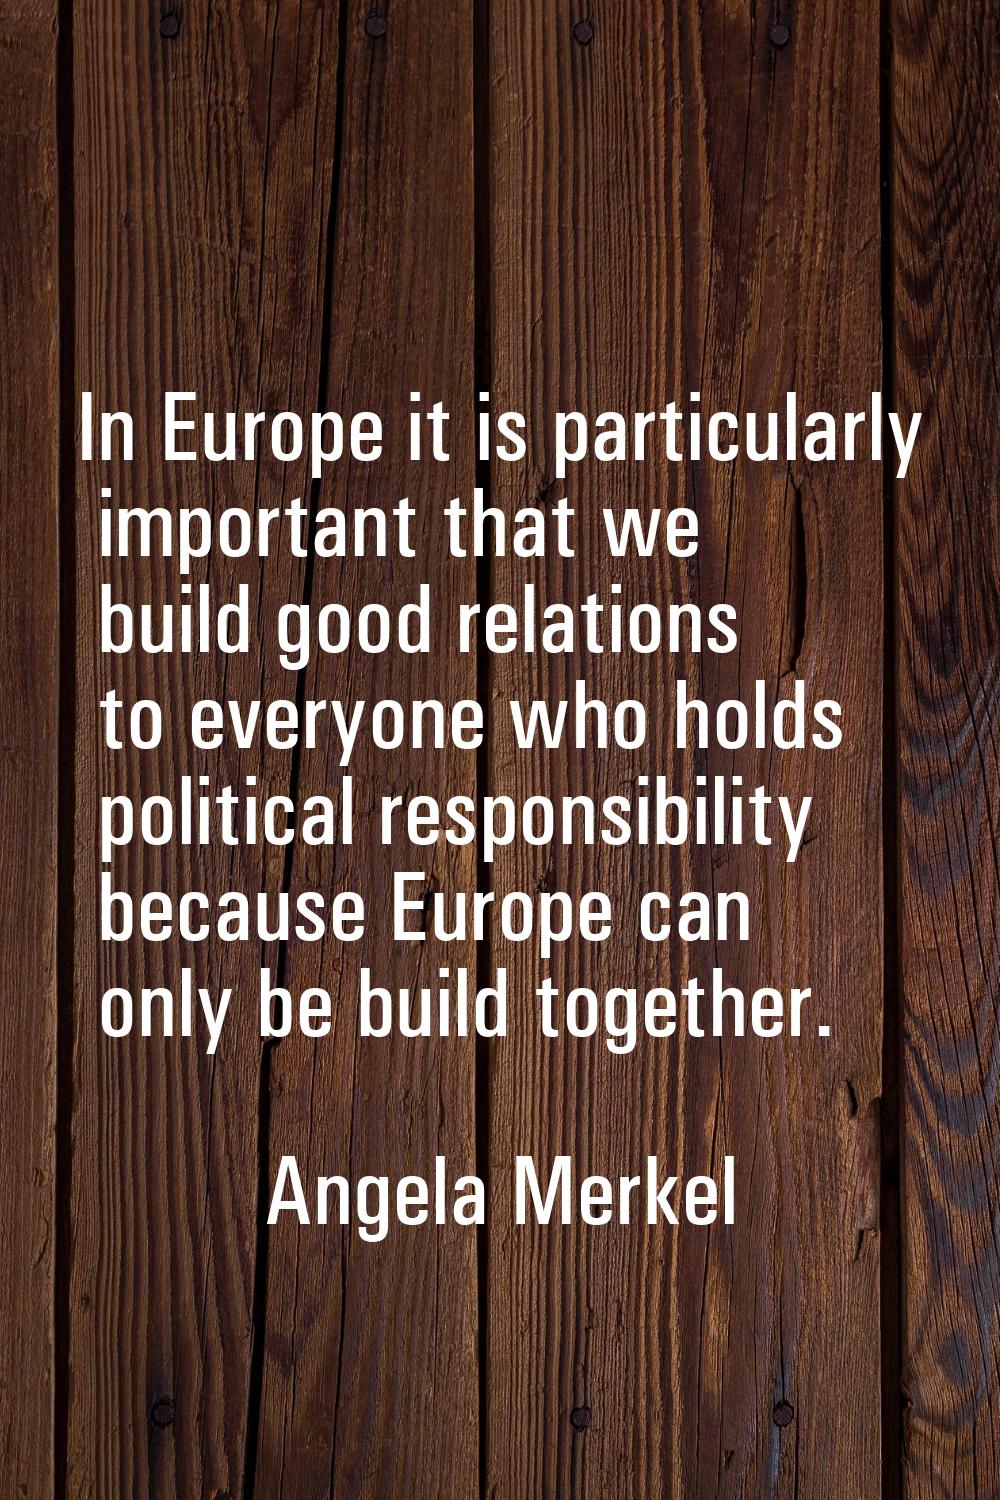 In Europe it is particularly important that we build good relations to everyone who holds political